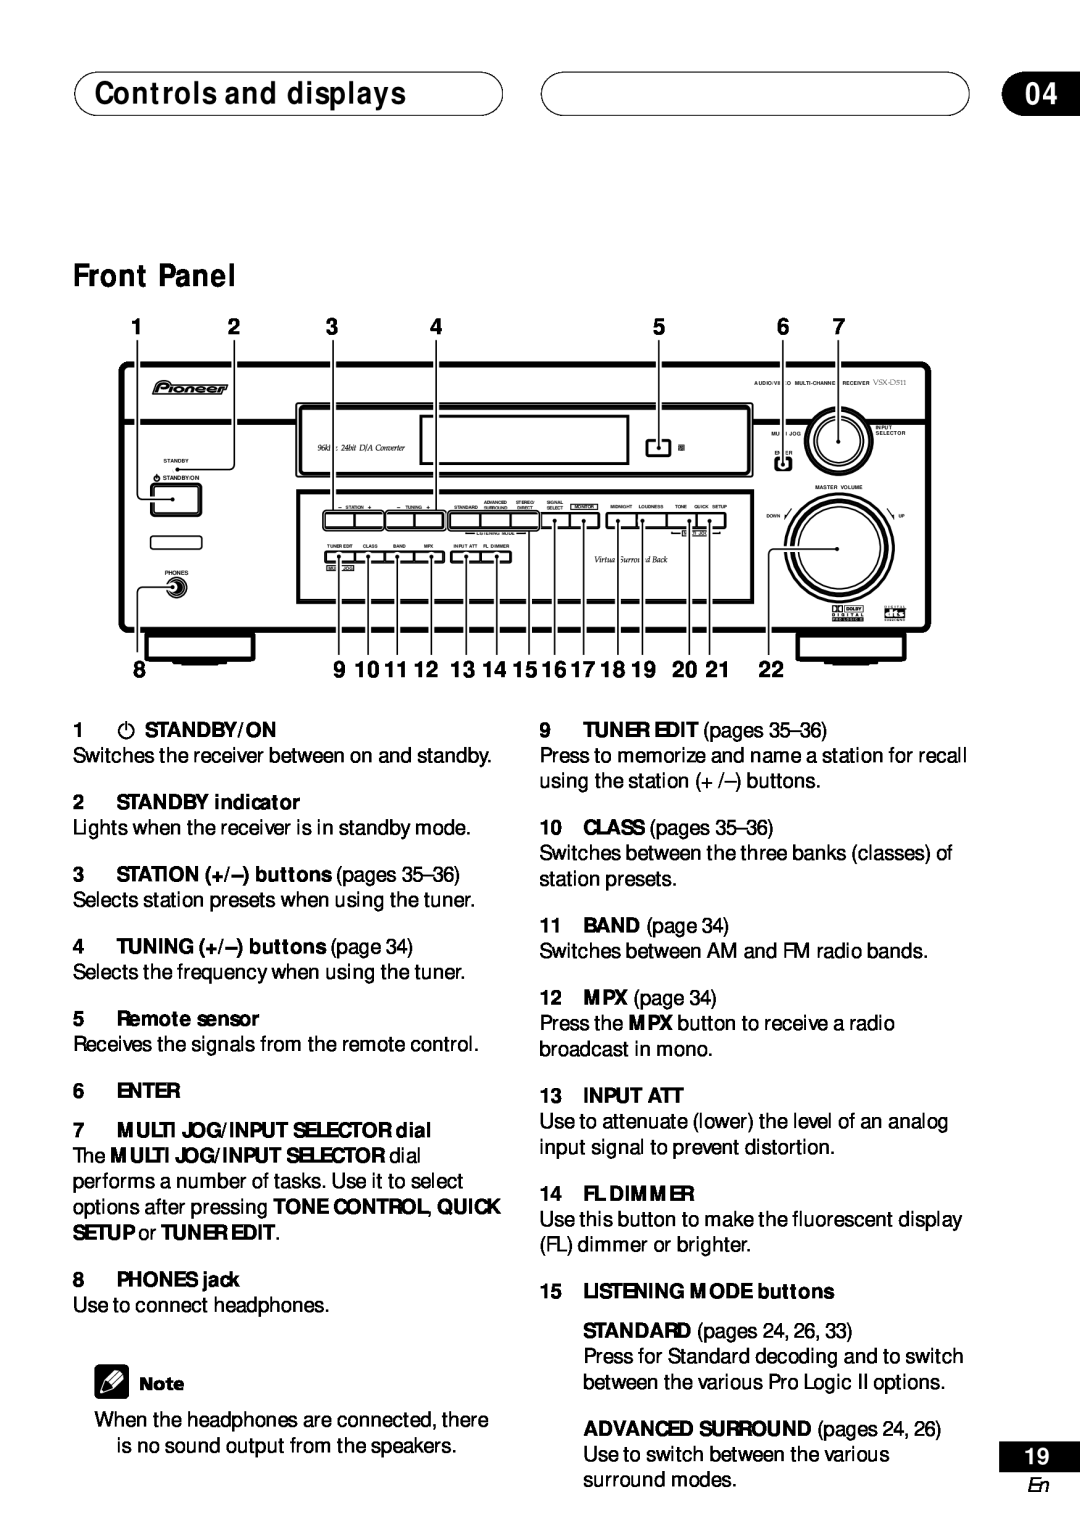 Pioneer VSX-D411 Controls and displays, Front Panel, 9 10 11 12 13 14 15 16 17 18, Standby/On, STANDBY indicator, 6ENTER 